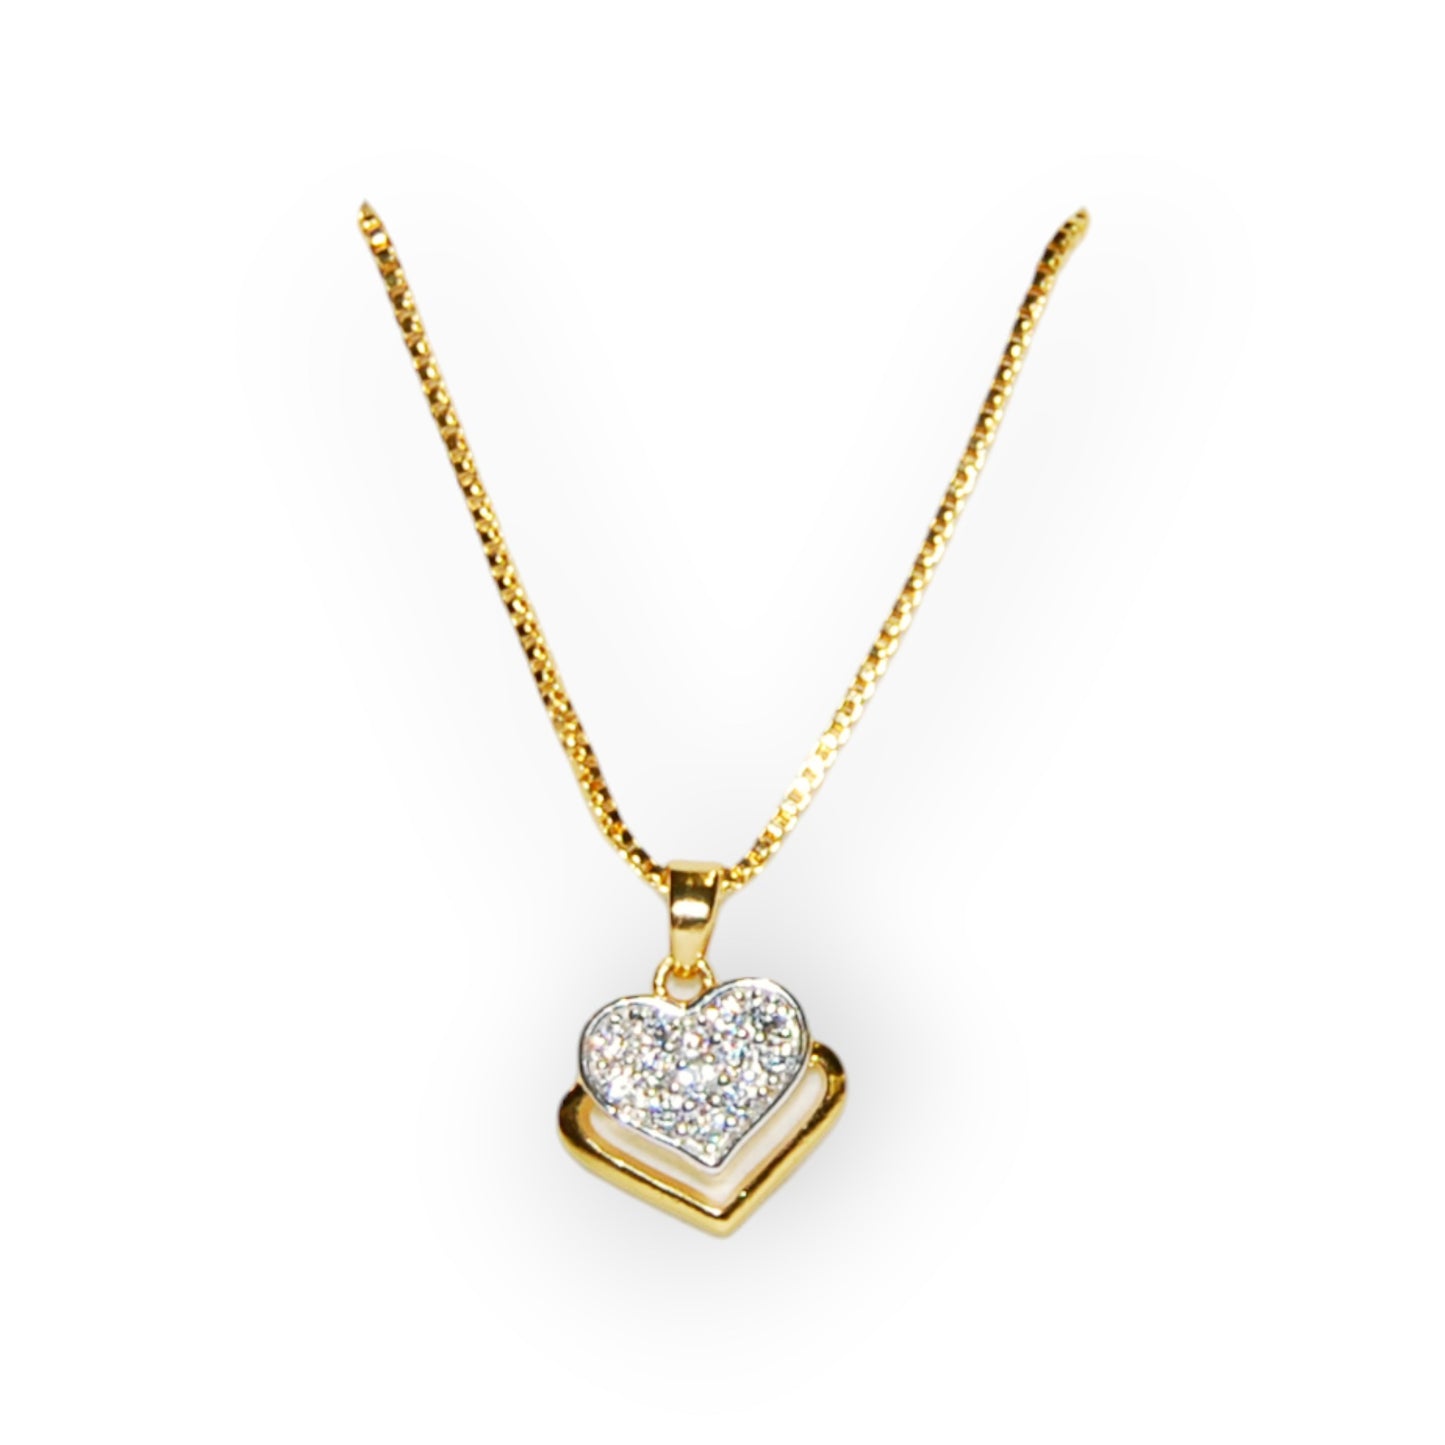 Gold-Plated Necklace and Heart Pendant